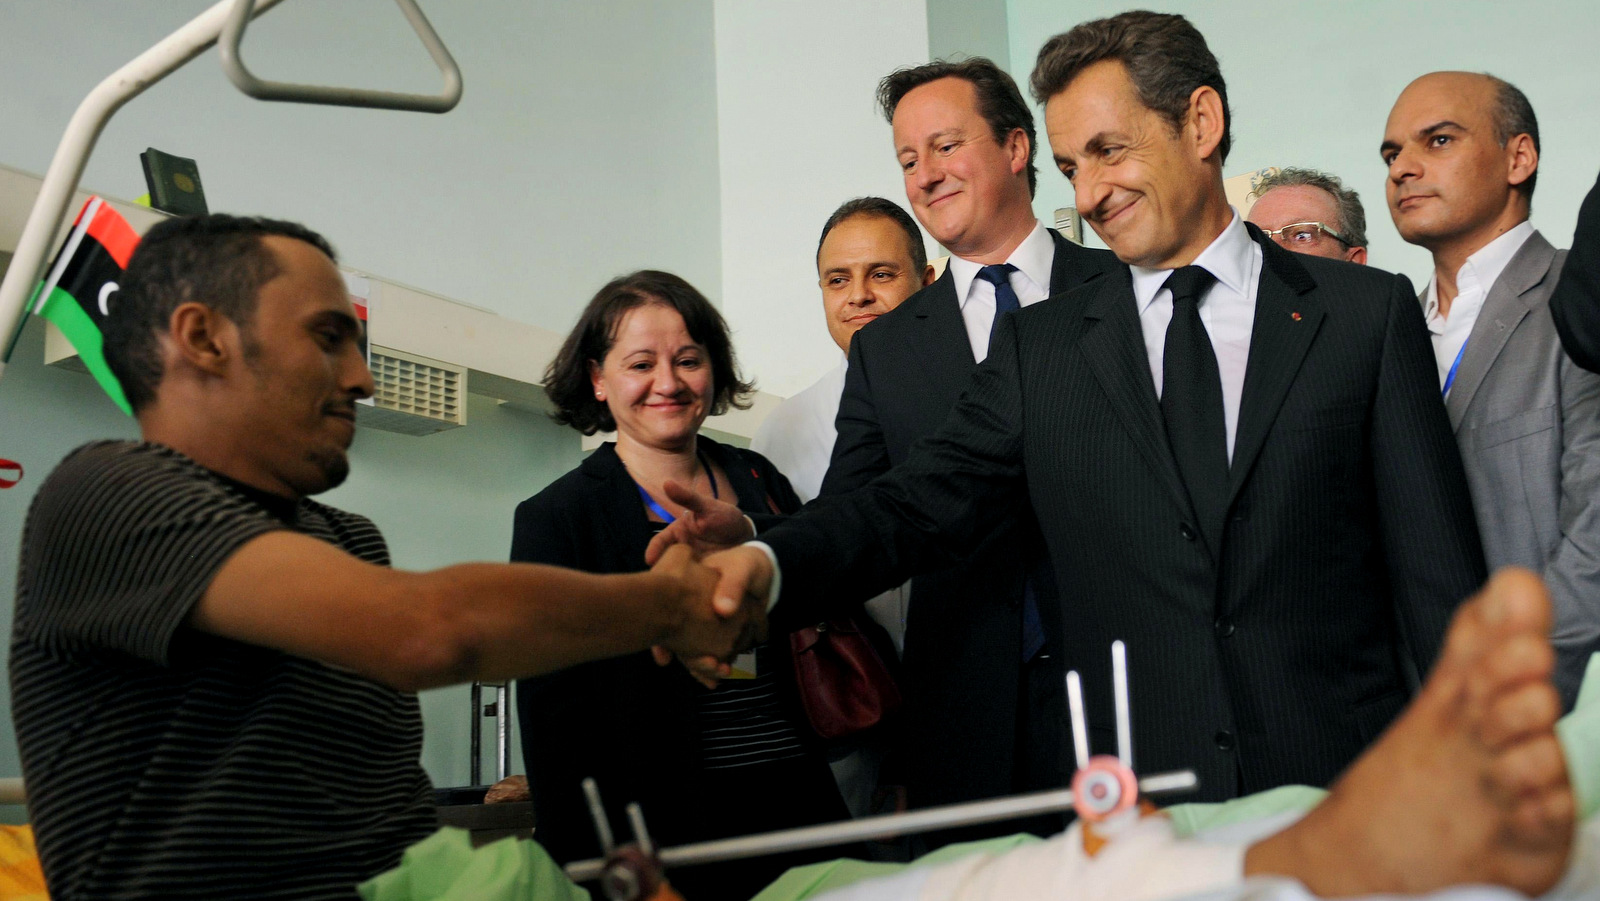 In a major endorsement for Libya's post-regime change rulers, French President Nicholas Sarkozy shakes hands with patient at the Tripoli Medical Center in Libya Thursday Sept. 15, 2011. (AP/Stefan Rousseau)